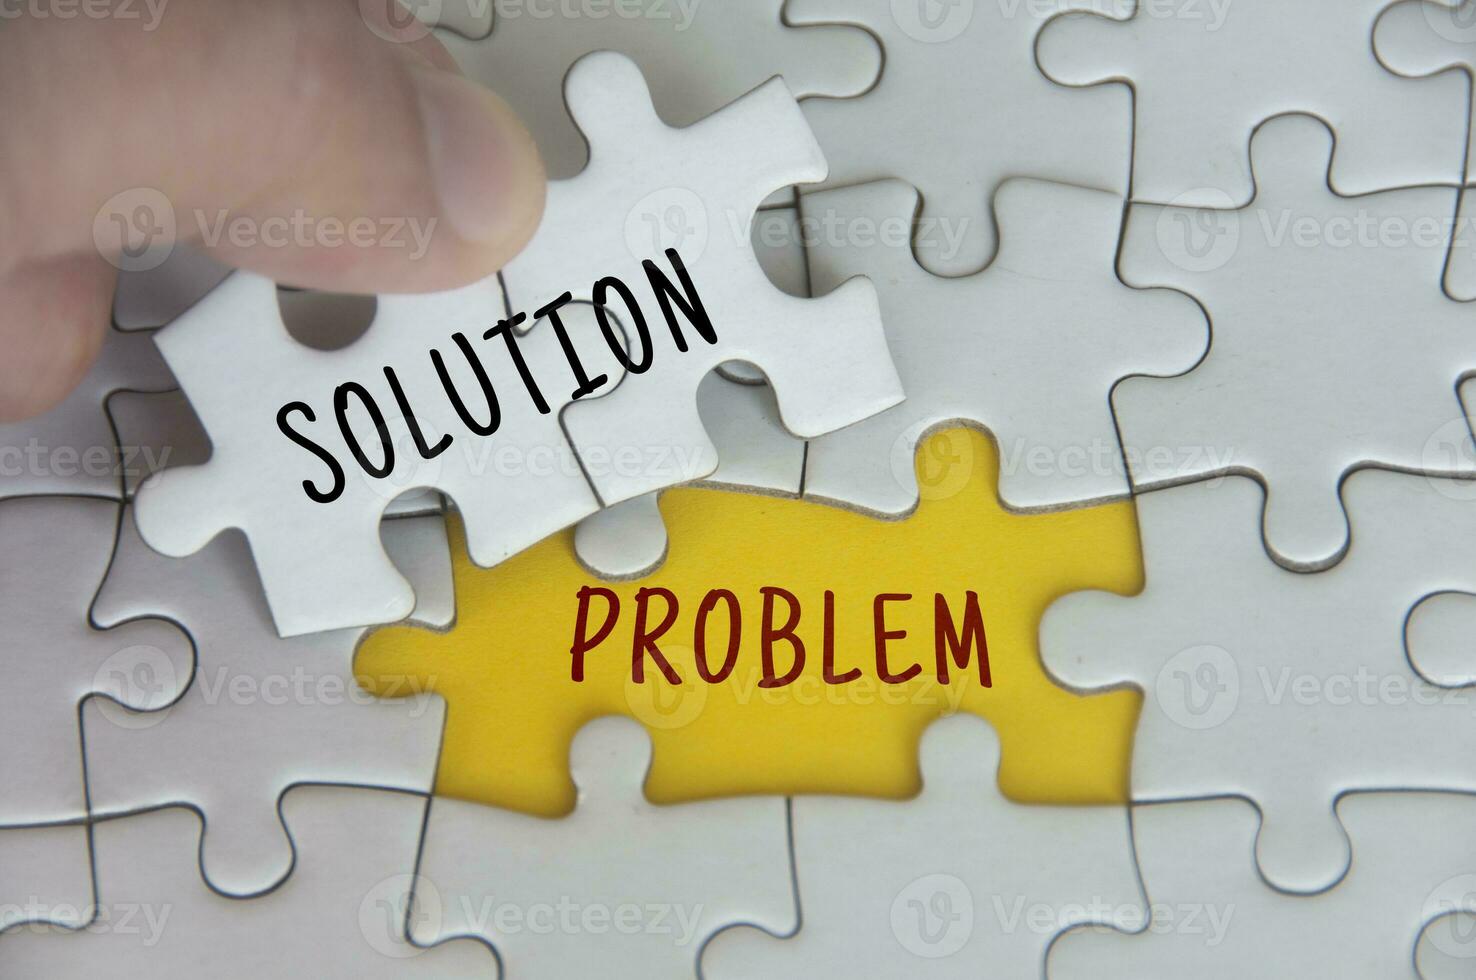 Solution to a problem text on jigsaw puzzle. Problem solving concept photo